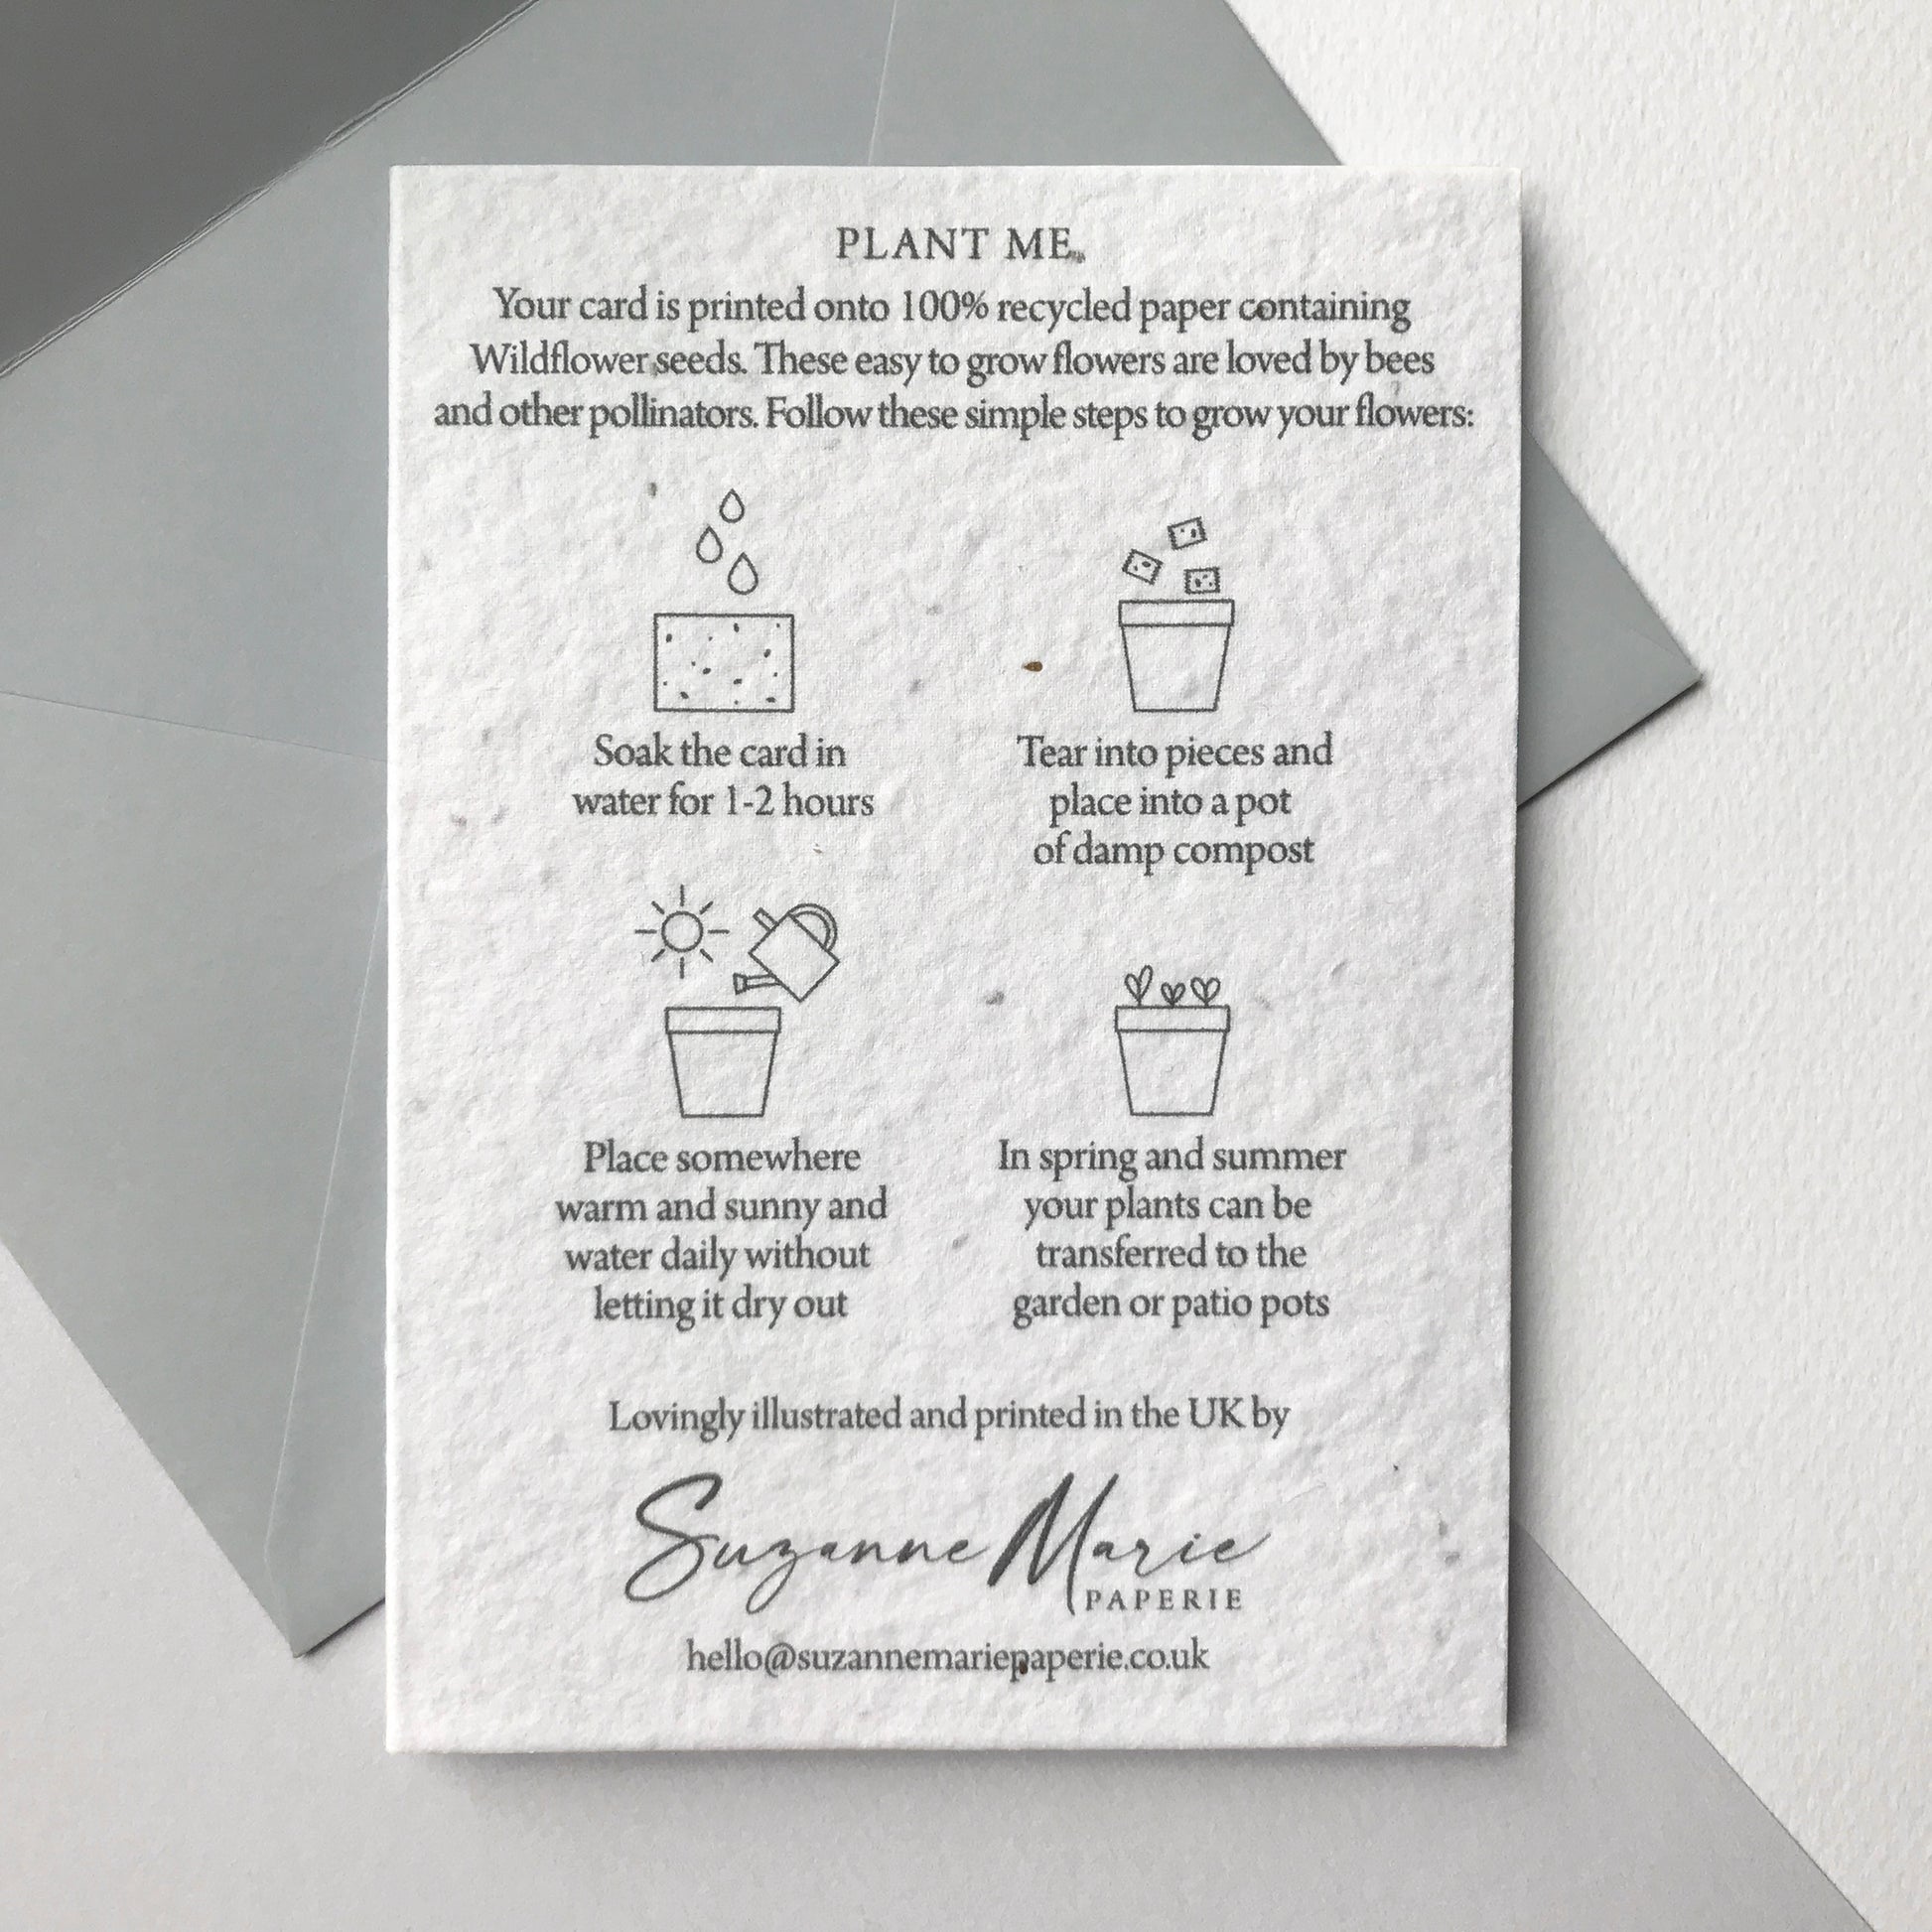 Image shows the back of the plantable seed paper engagement card featuring easy to follow planting instructions by Suzanne Marie Paperie.